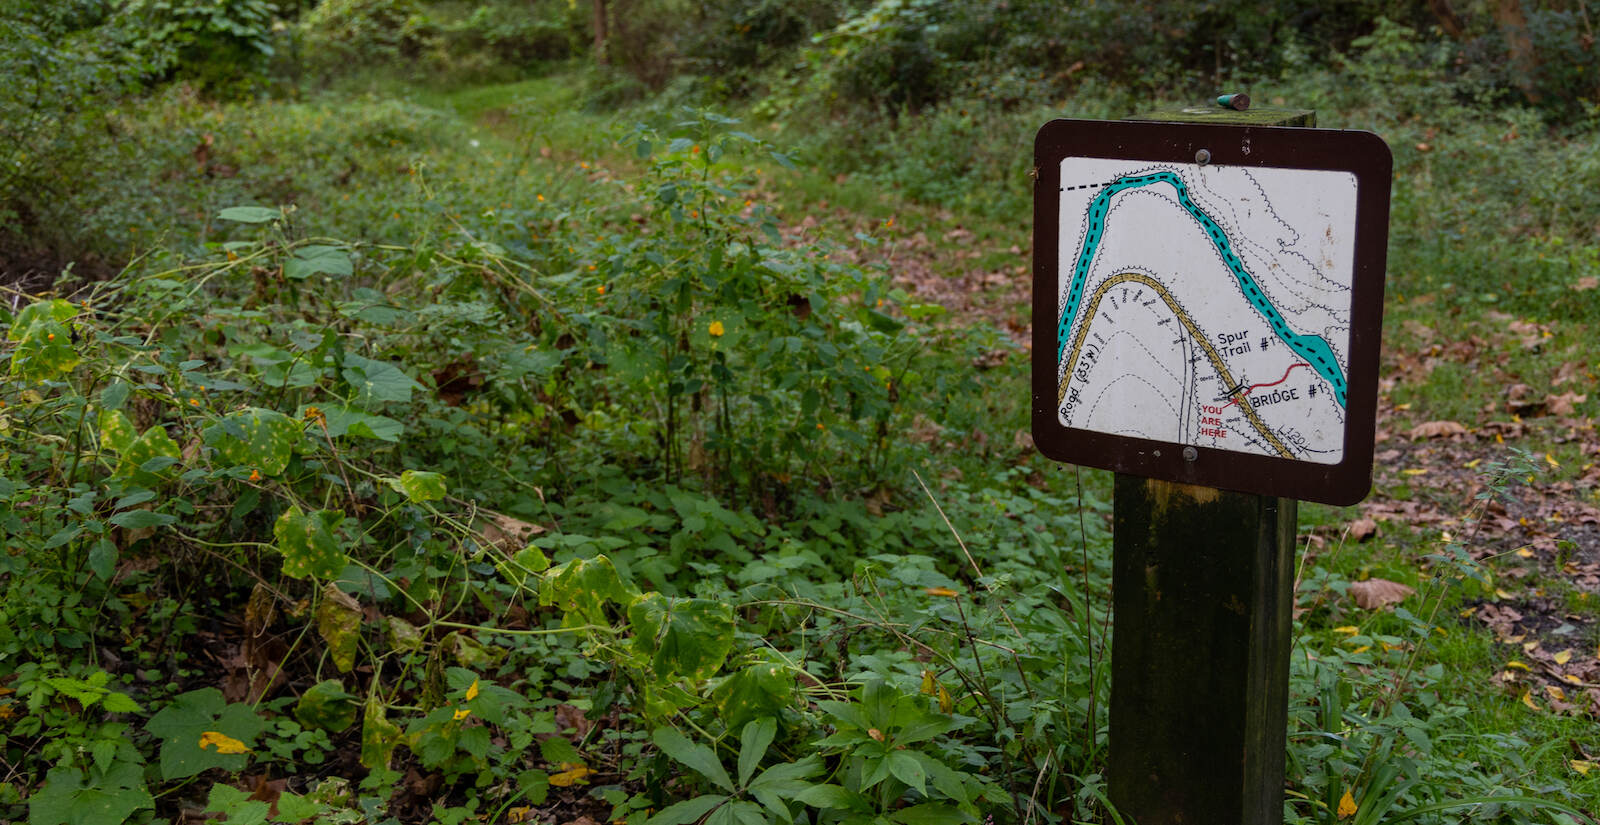 There are already two established trails in Big Elk Creek State Park, 1,700-acres, now designated as a Pennsylvania State Park. Illustrated signs along the Spring Lawn Trail make it easy to stay on course. (Kimberly Paynter/WHYY)